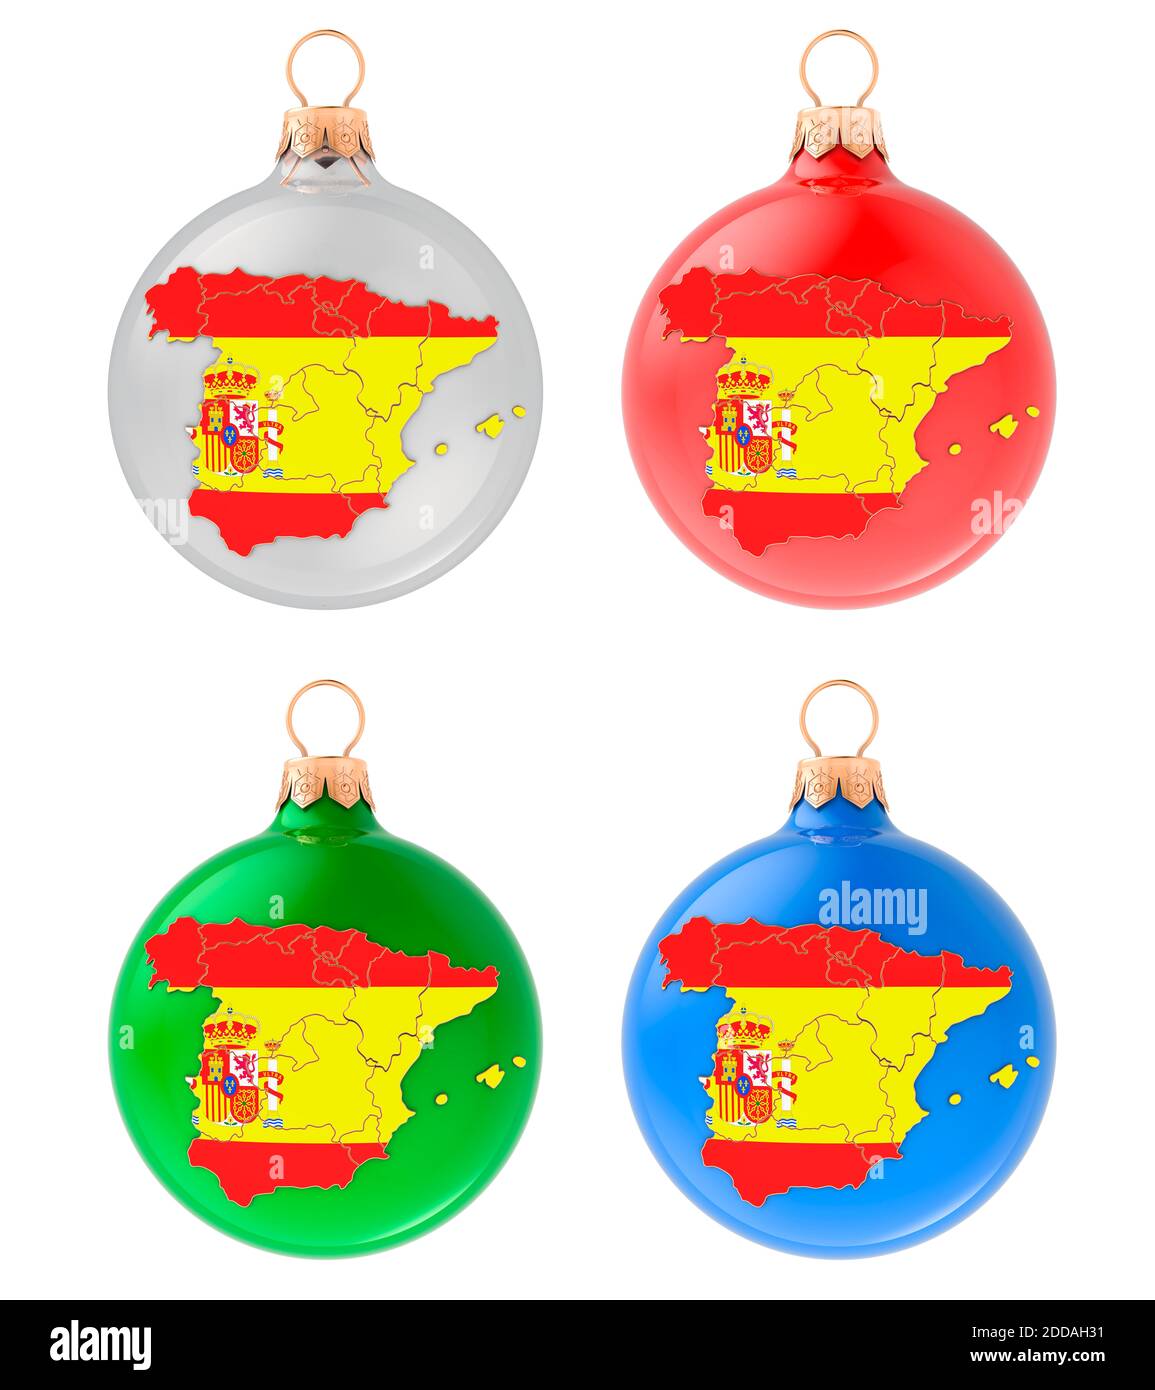 Christmas balls with Spanish map, 3D rendering isolated on white background Stock Photo